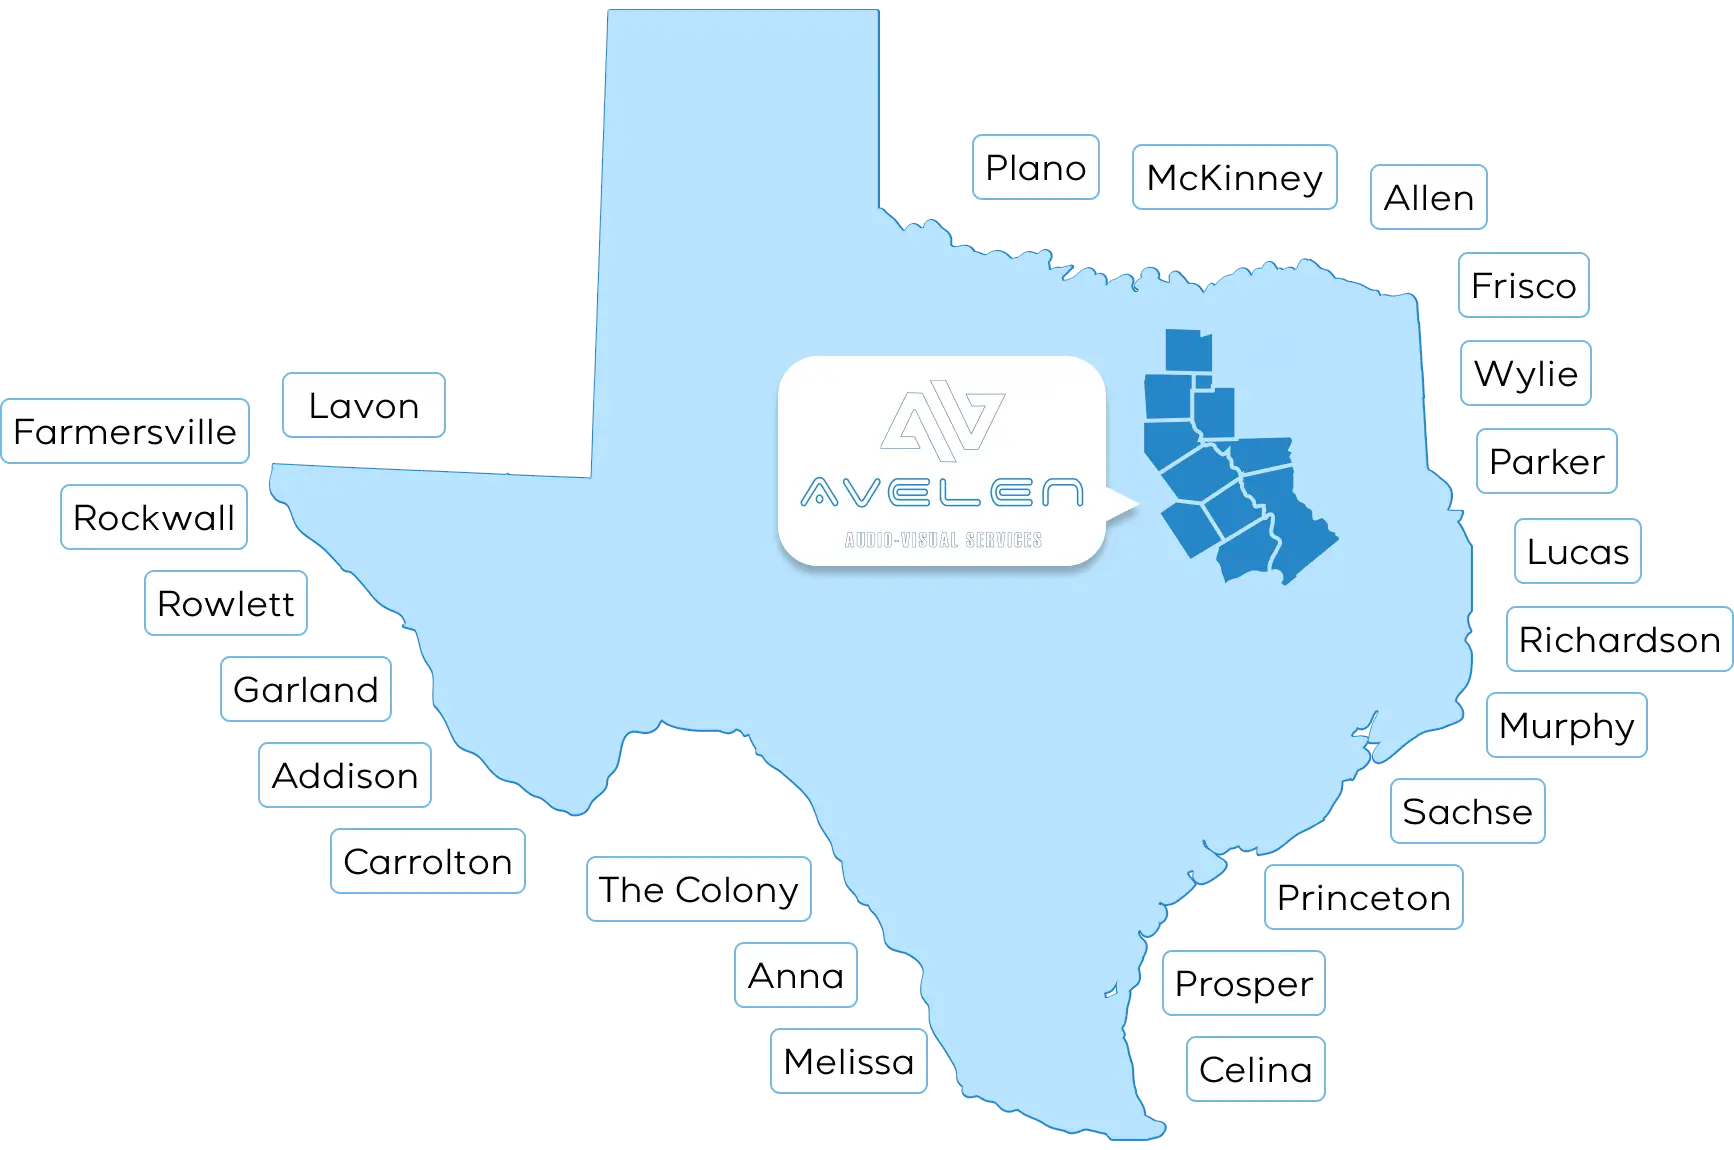 Avalen Texas Territories and Cities Serviced